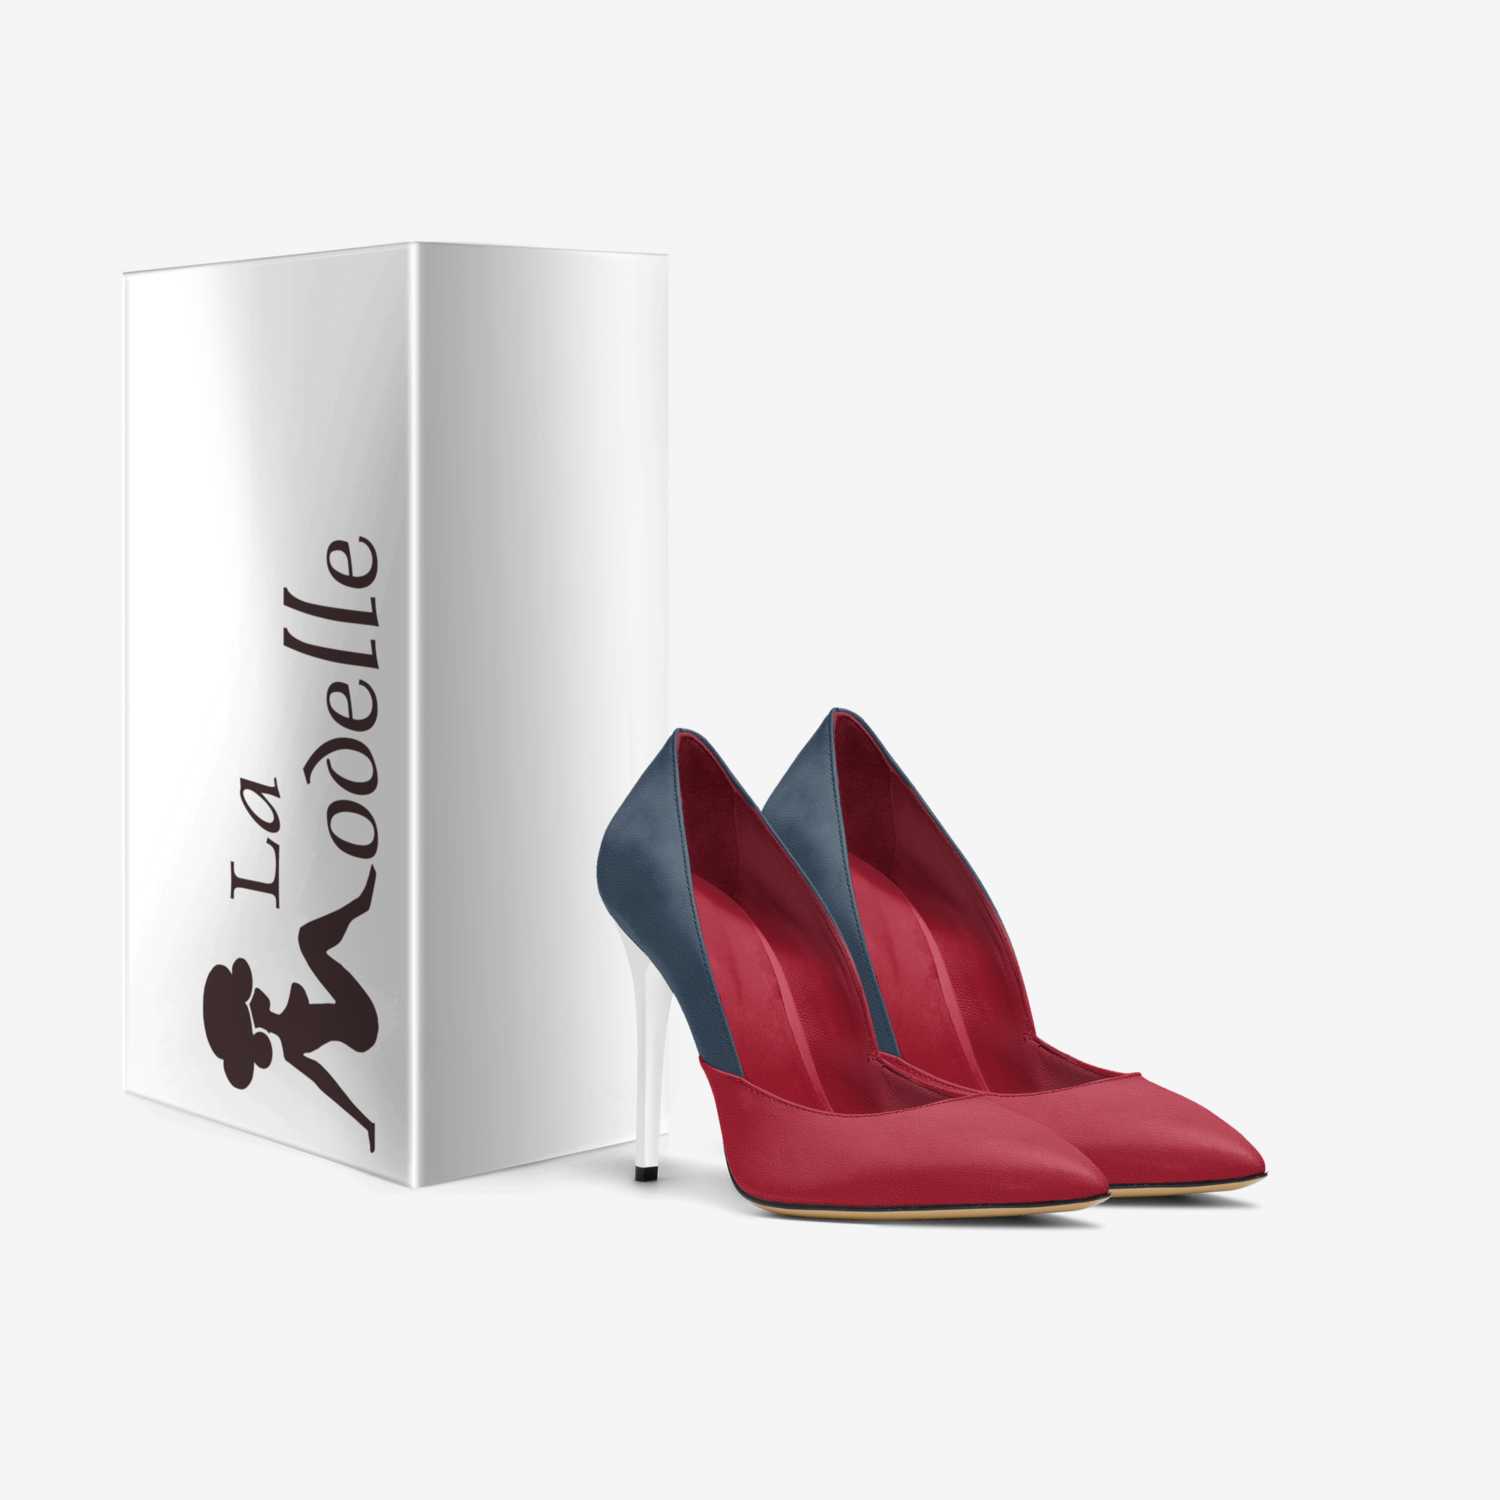 TriColor custom made in Italy shoes by La Modelle | Box view